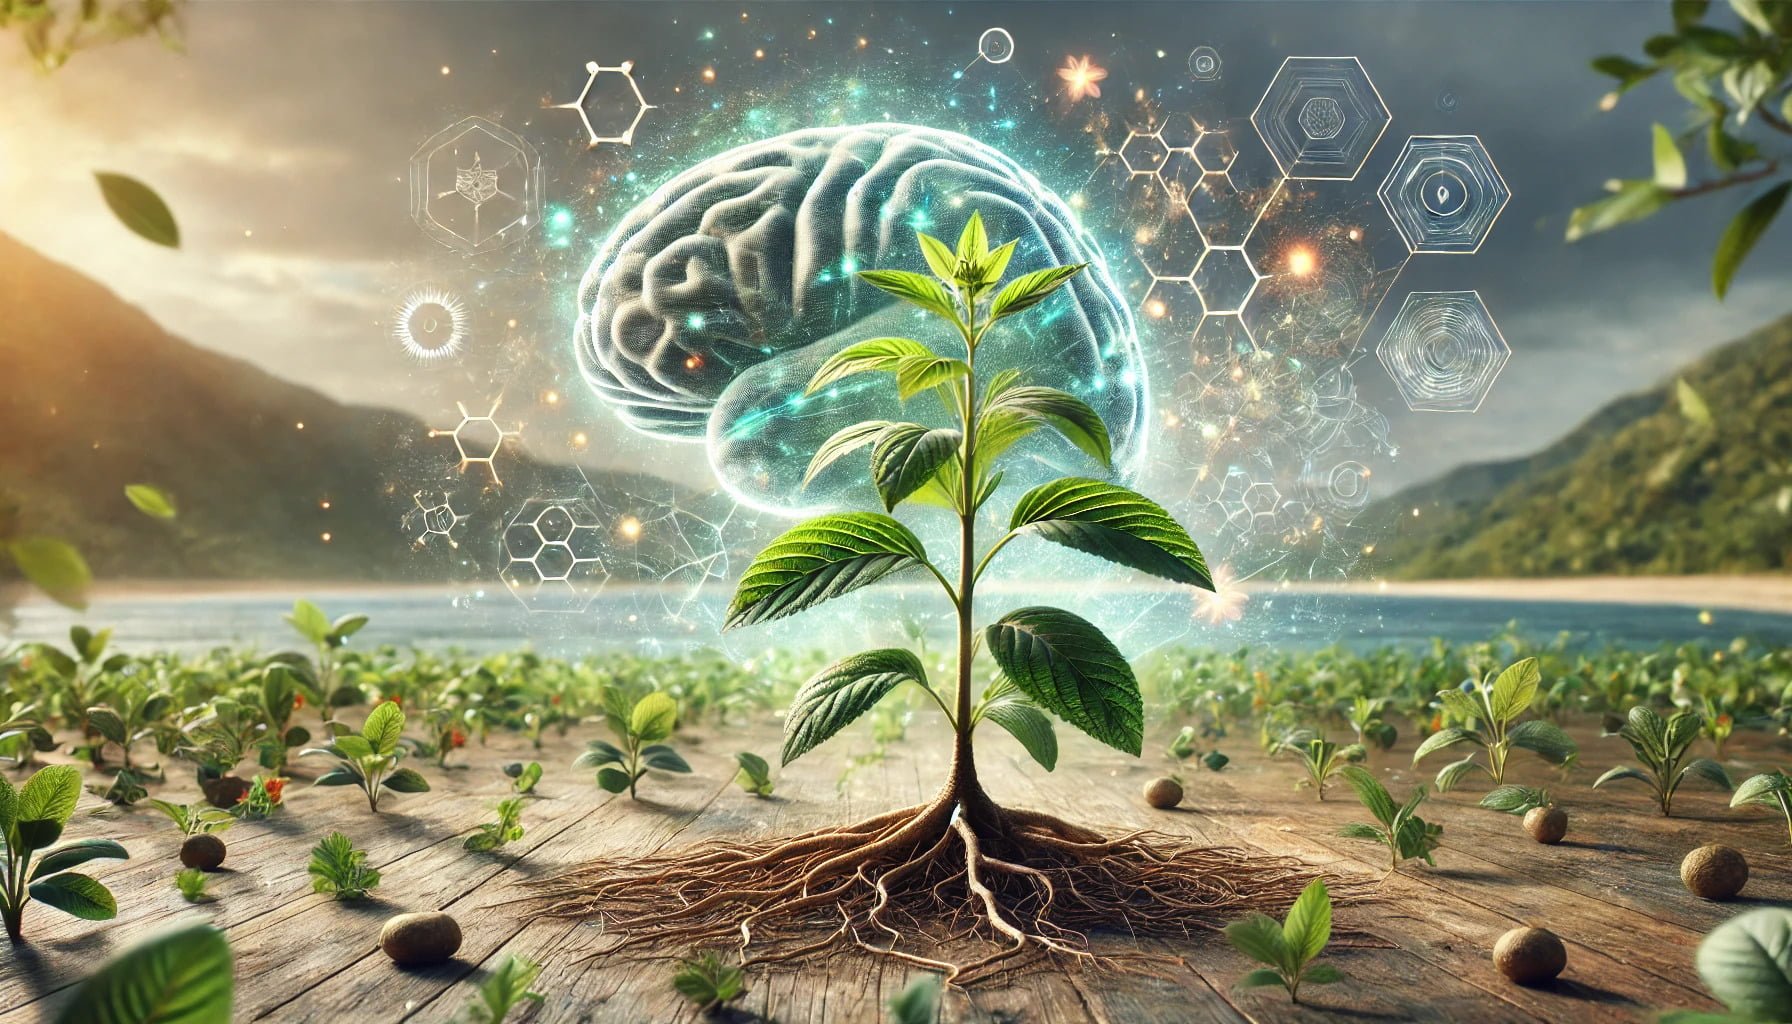 A photorealistic image of ashwagandha with a brain in the background depicting its nootropic effects.